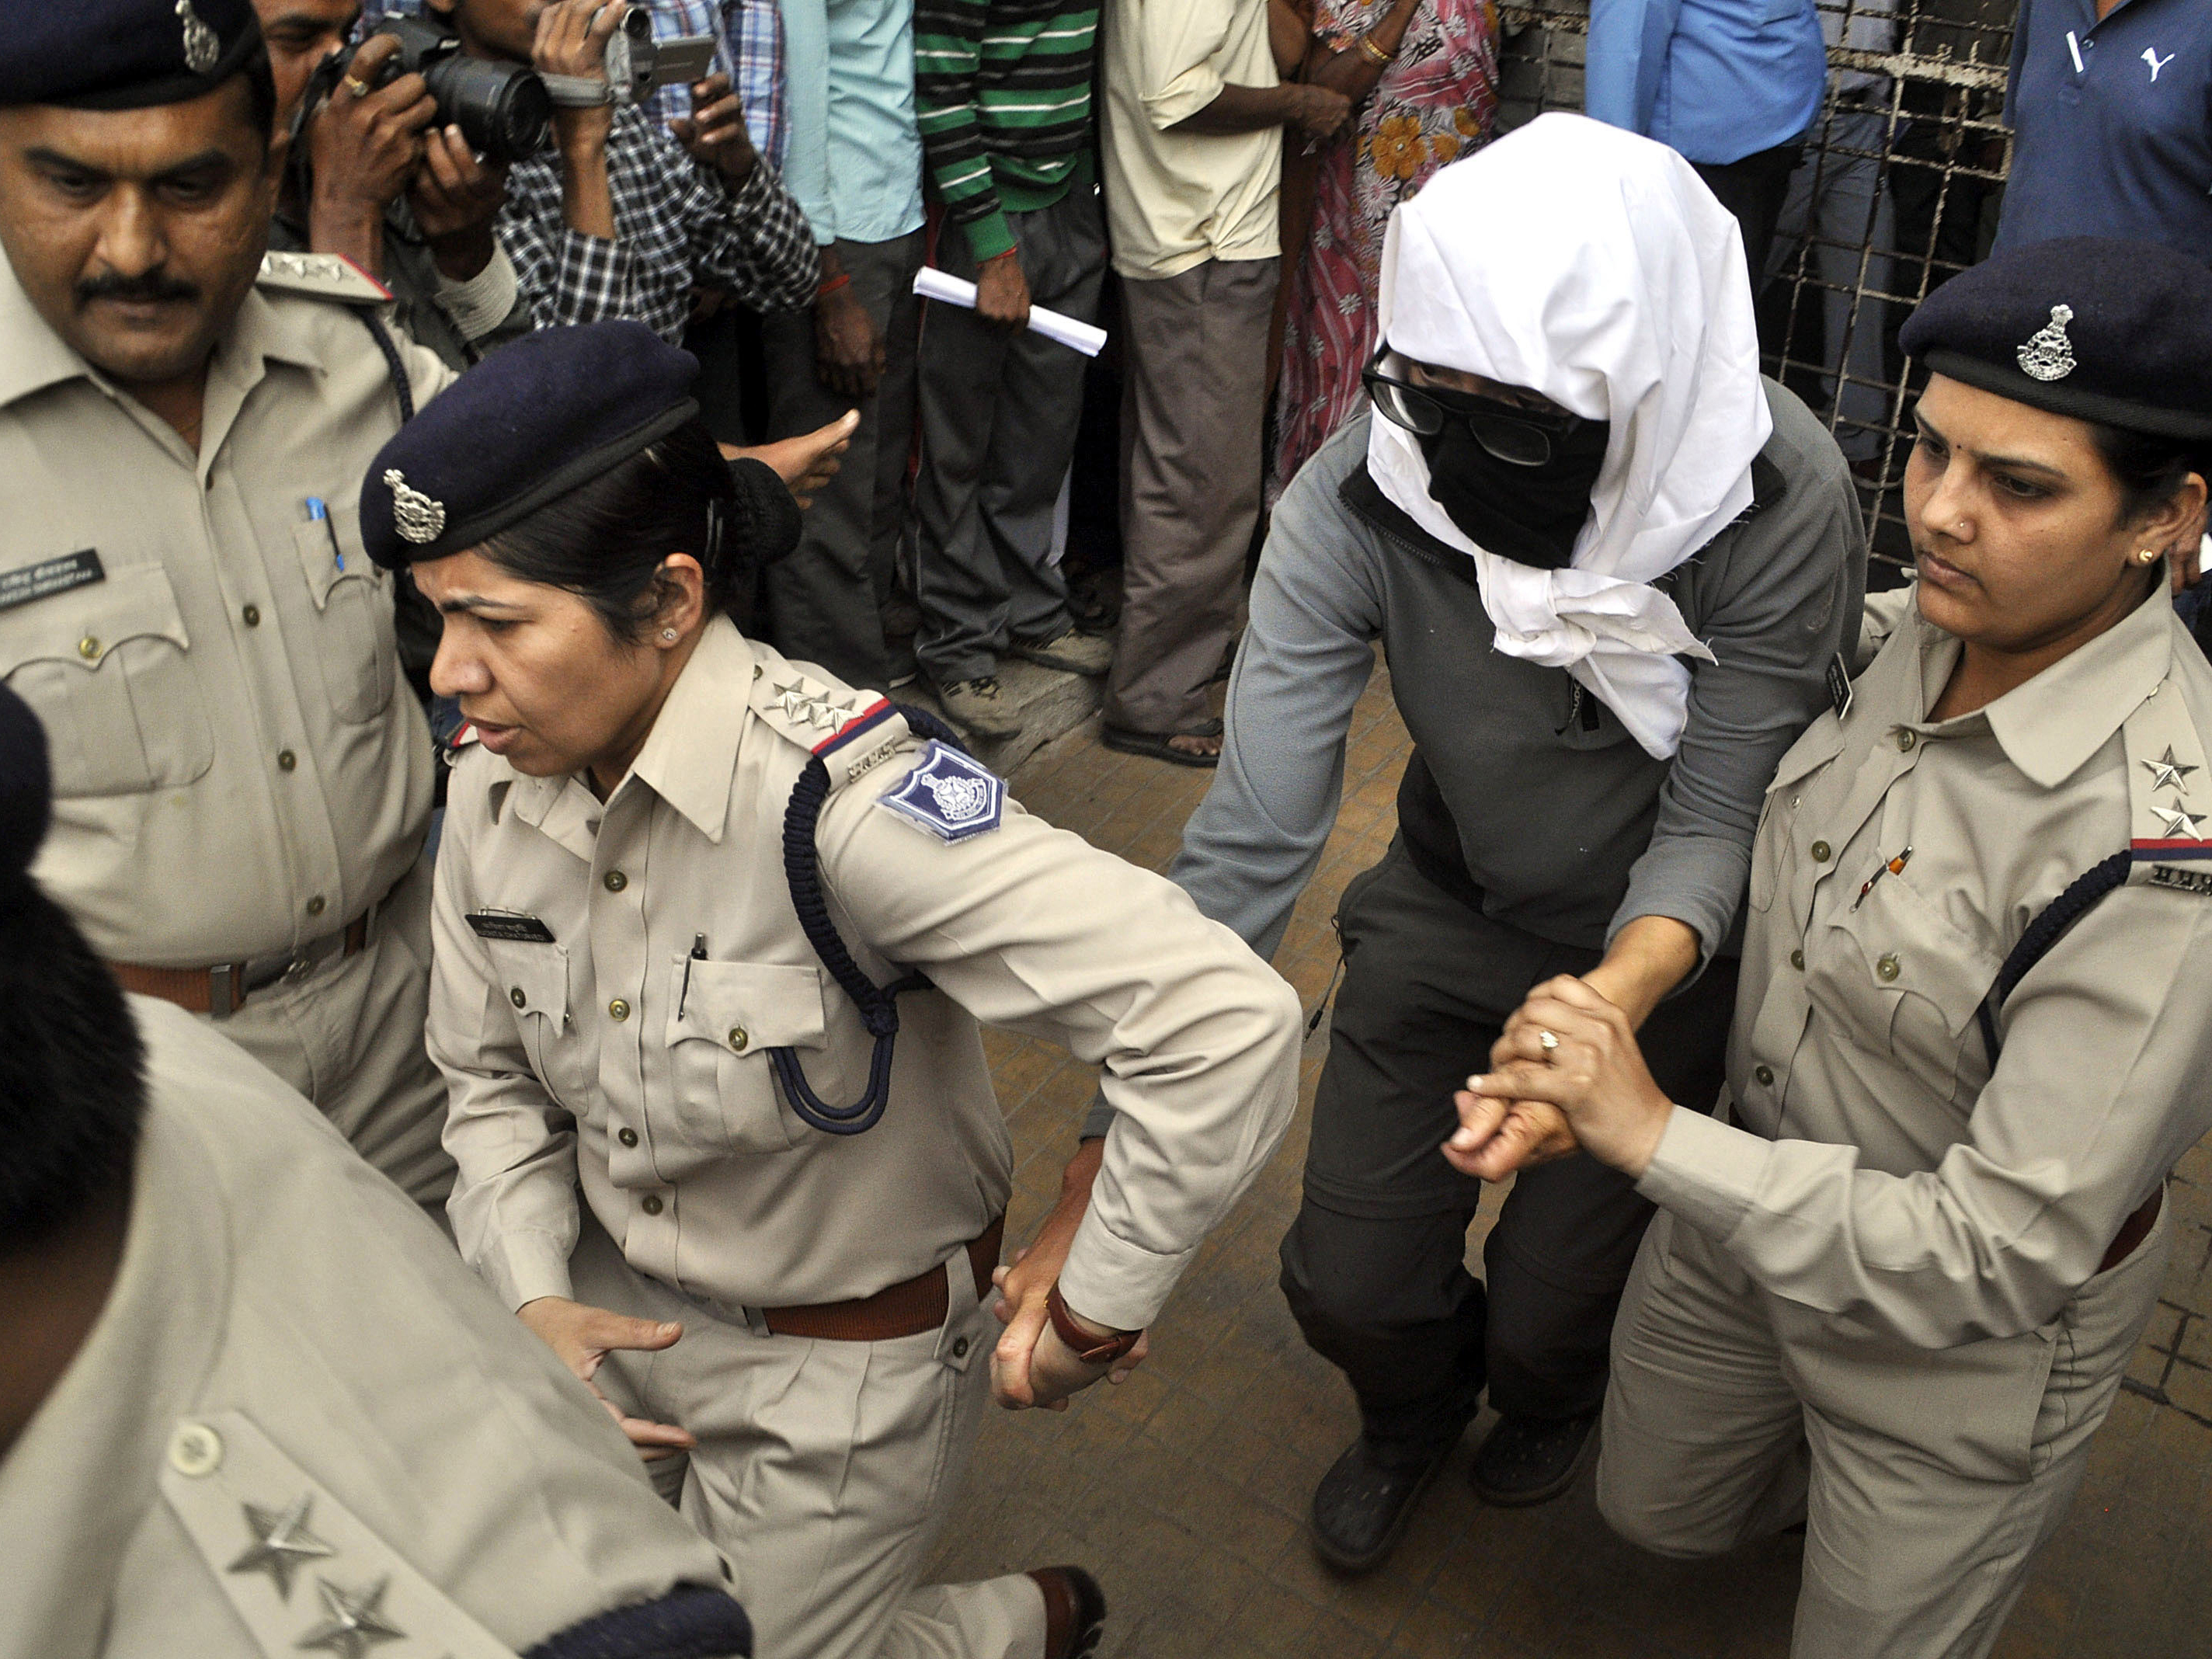 Gang-rape of tourist in India rekindles outrage - CBS News2848 x 2136